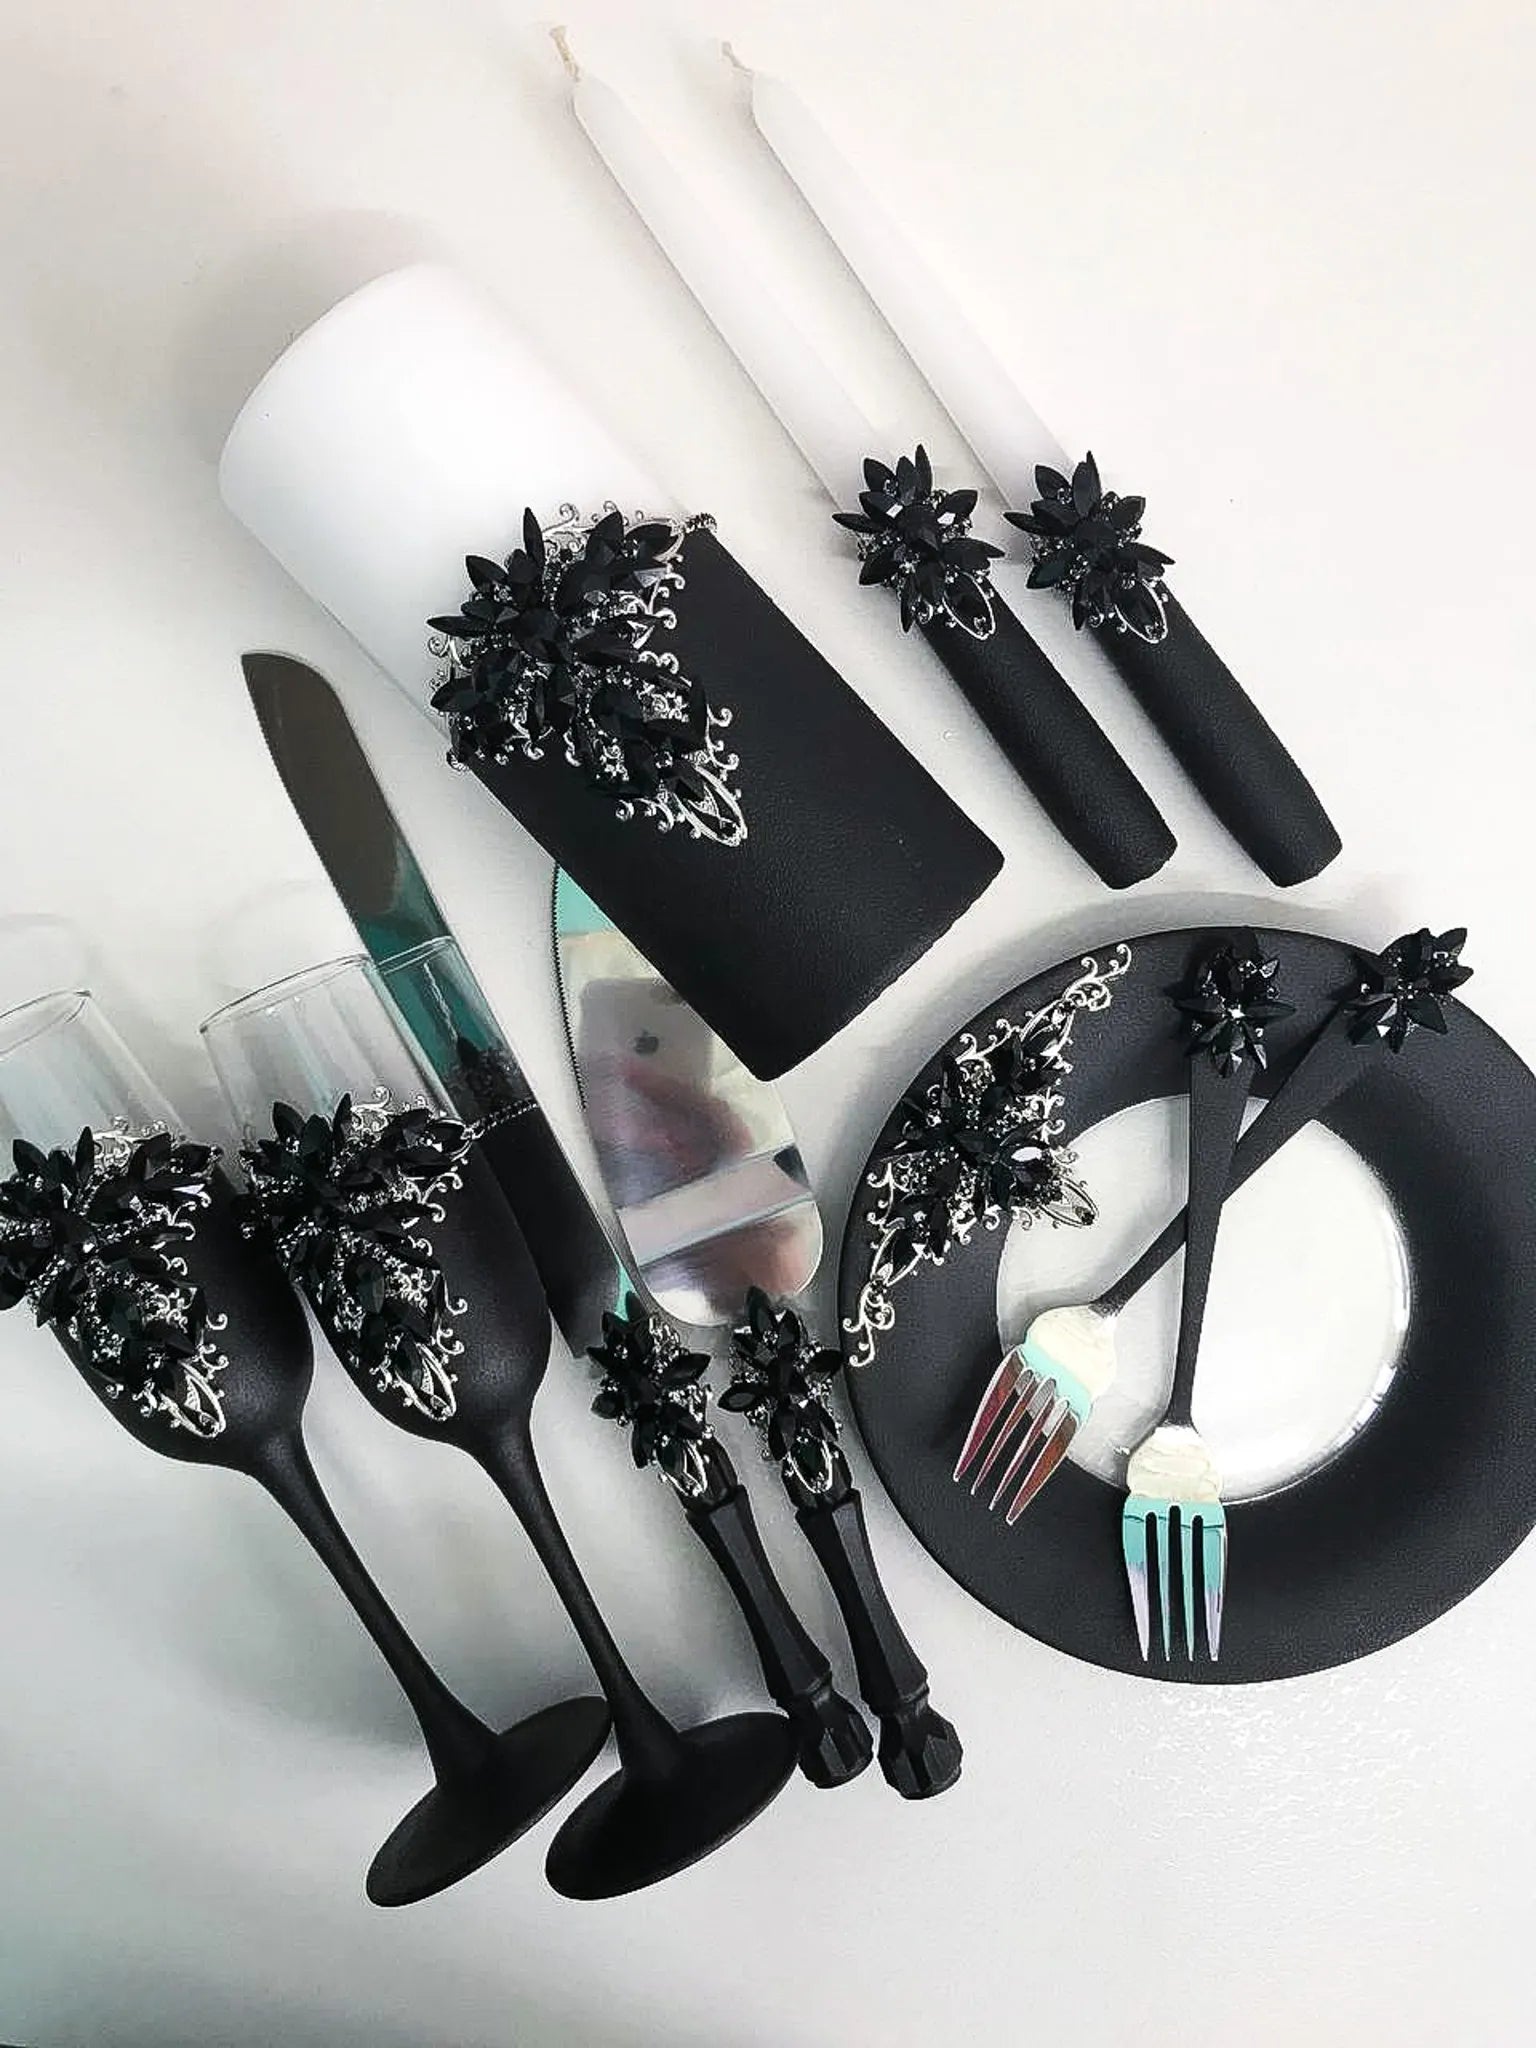 Gothic-themed wedding flutes for special celebrations